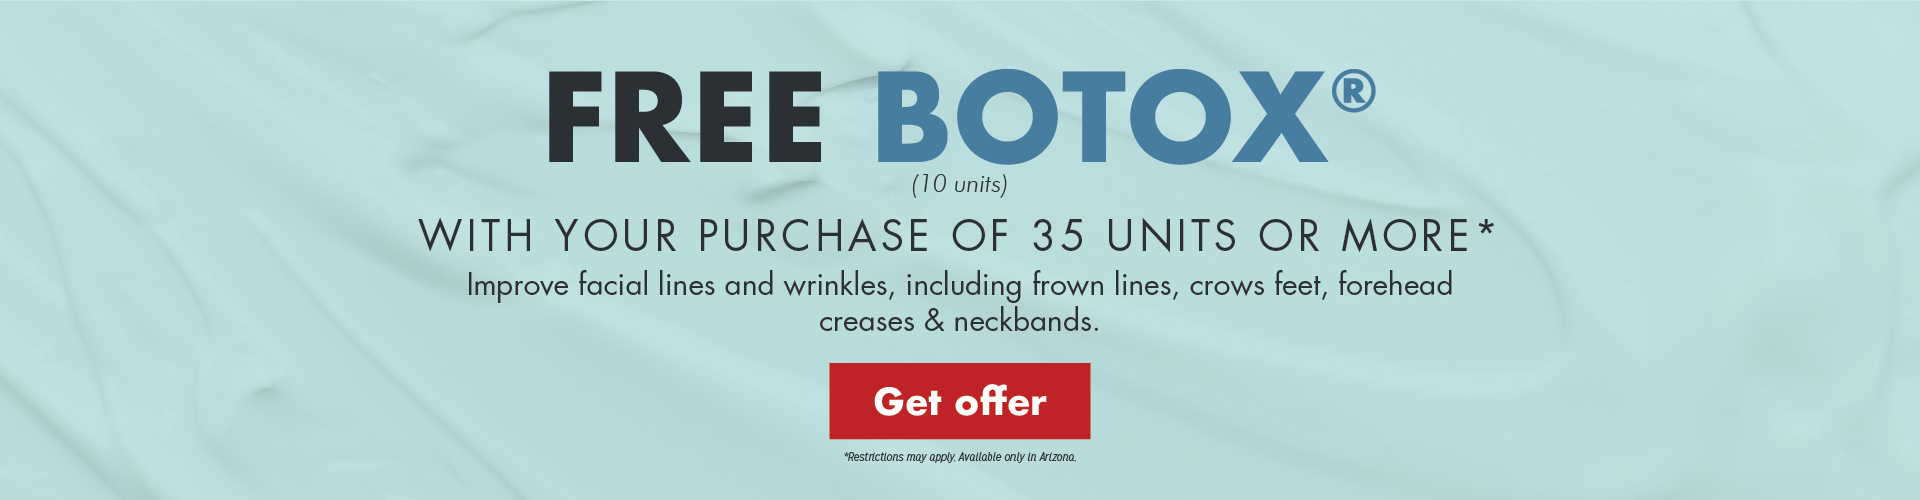 Free Botox with purchase of 35 units